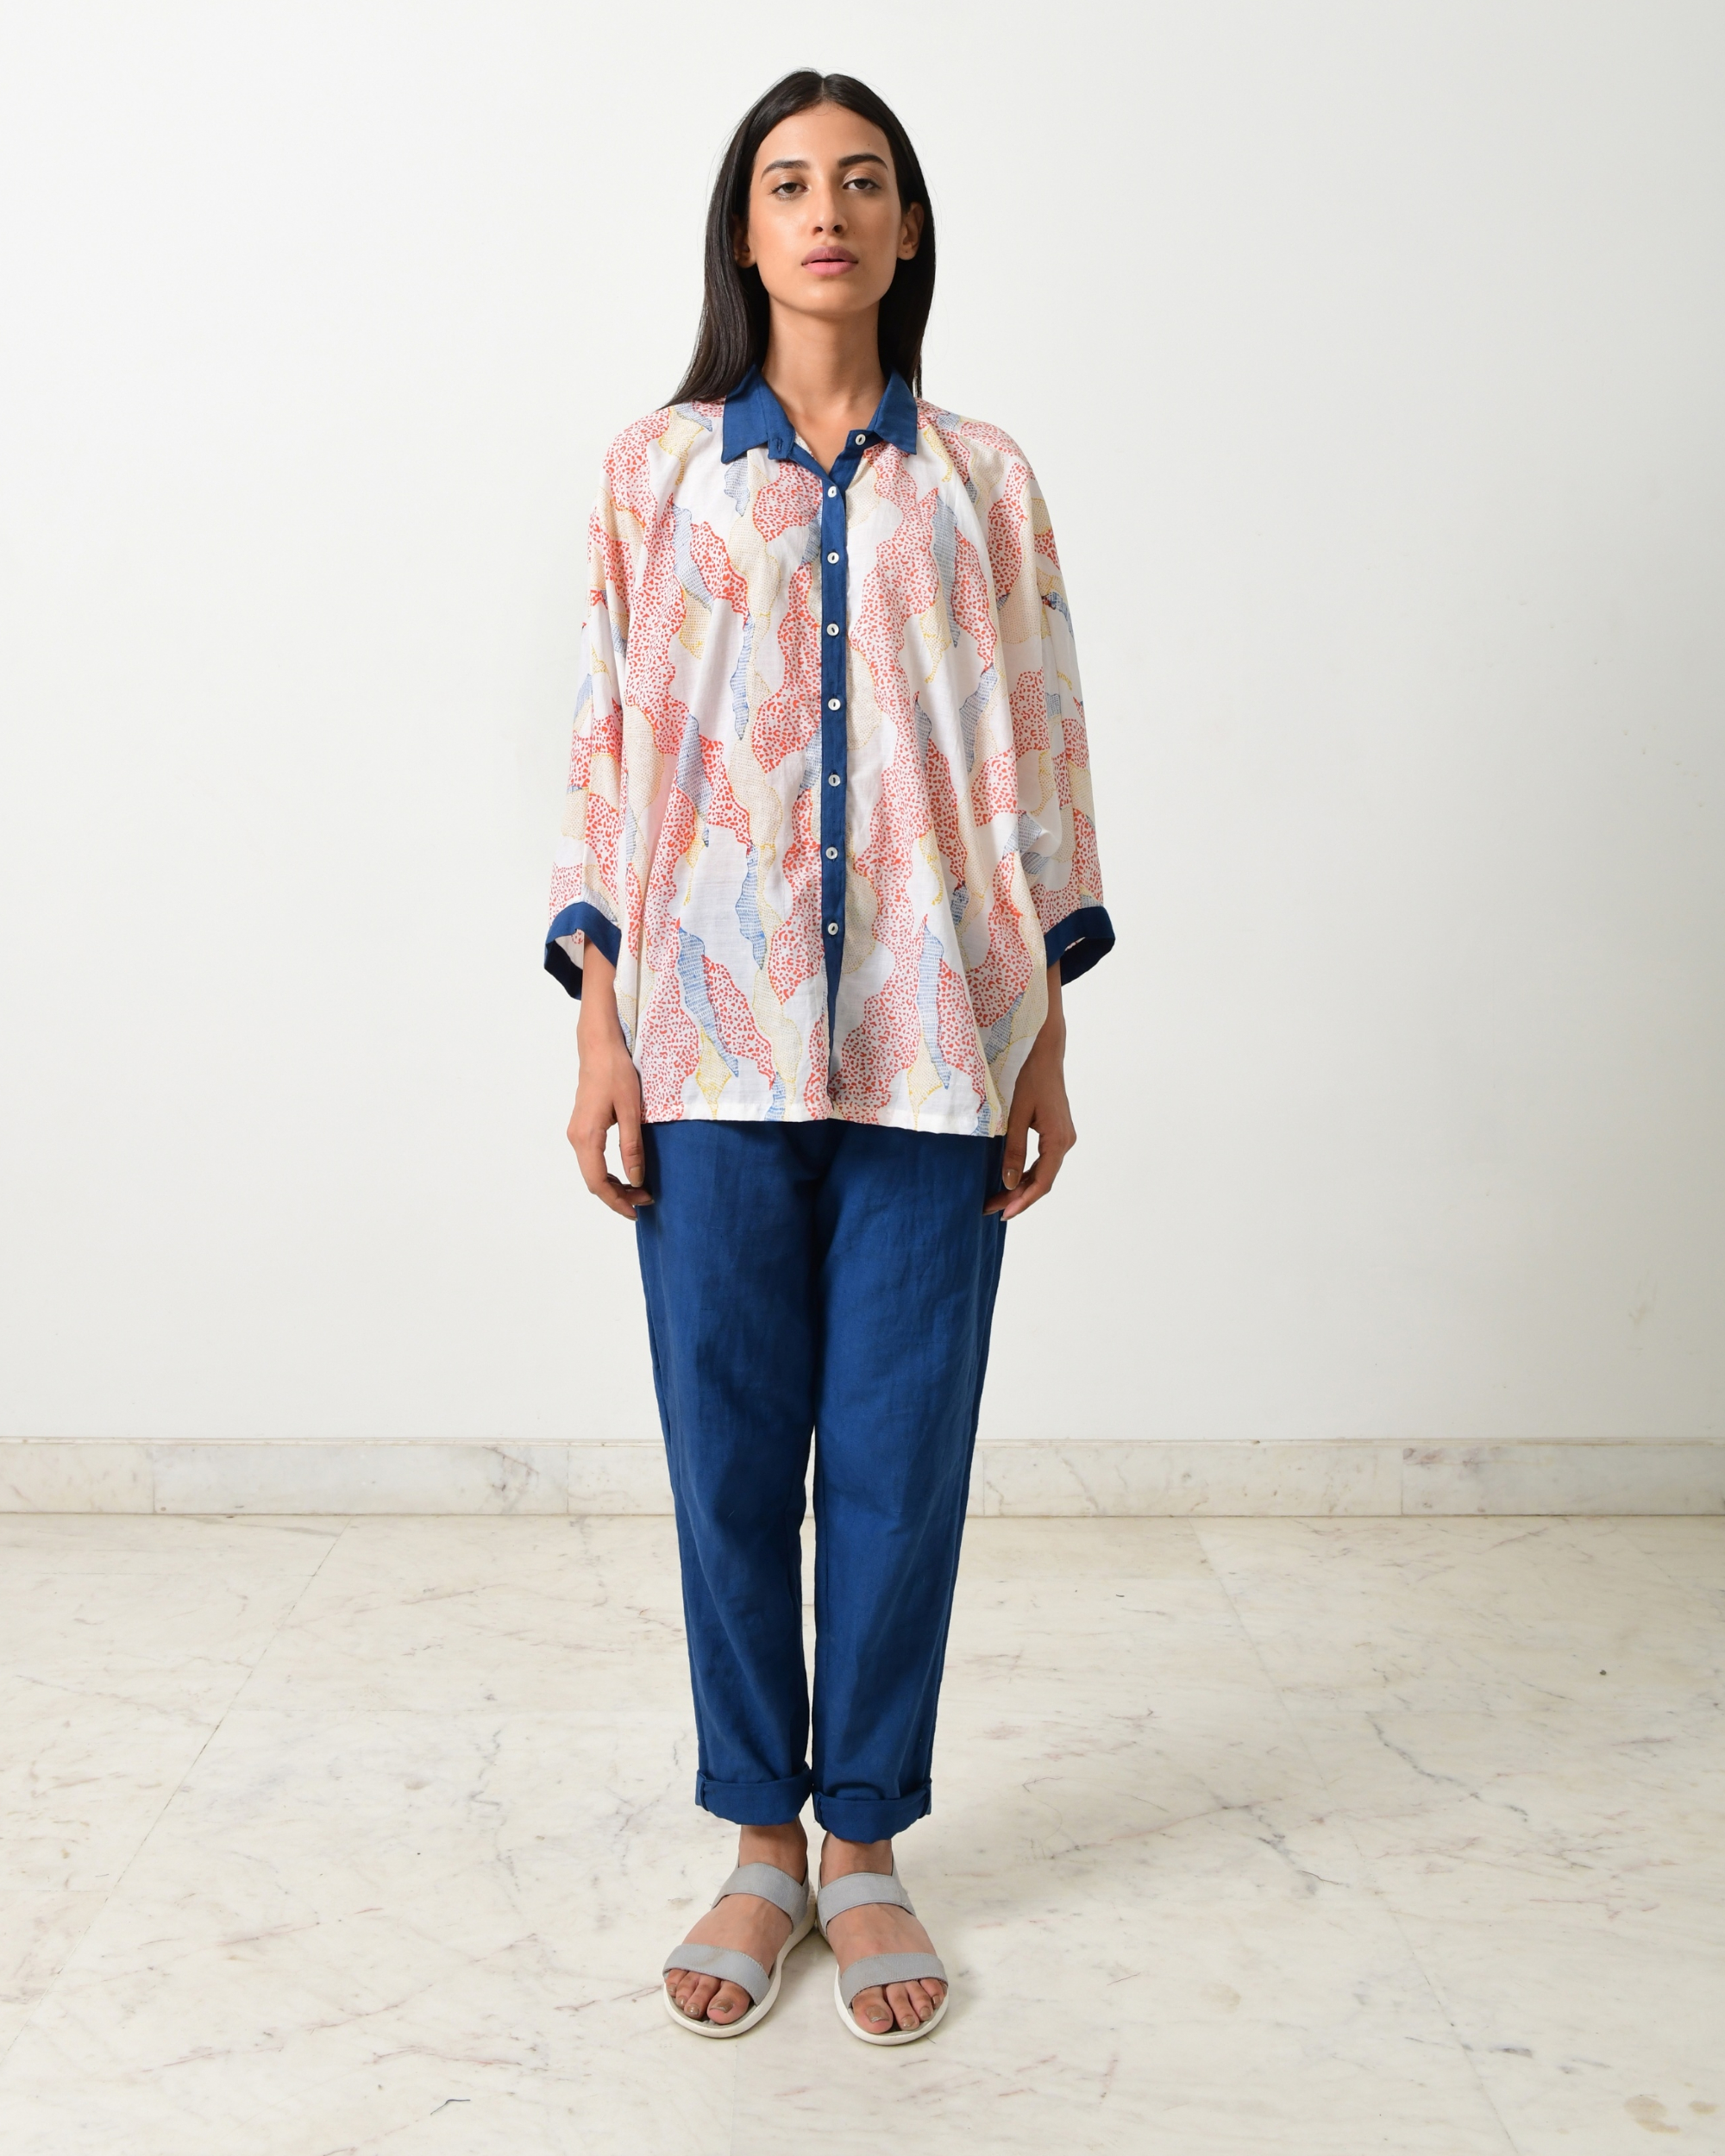 White and blue block printed batwing shirt